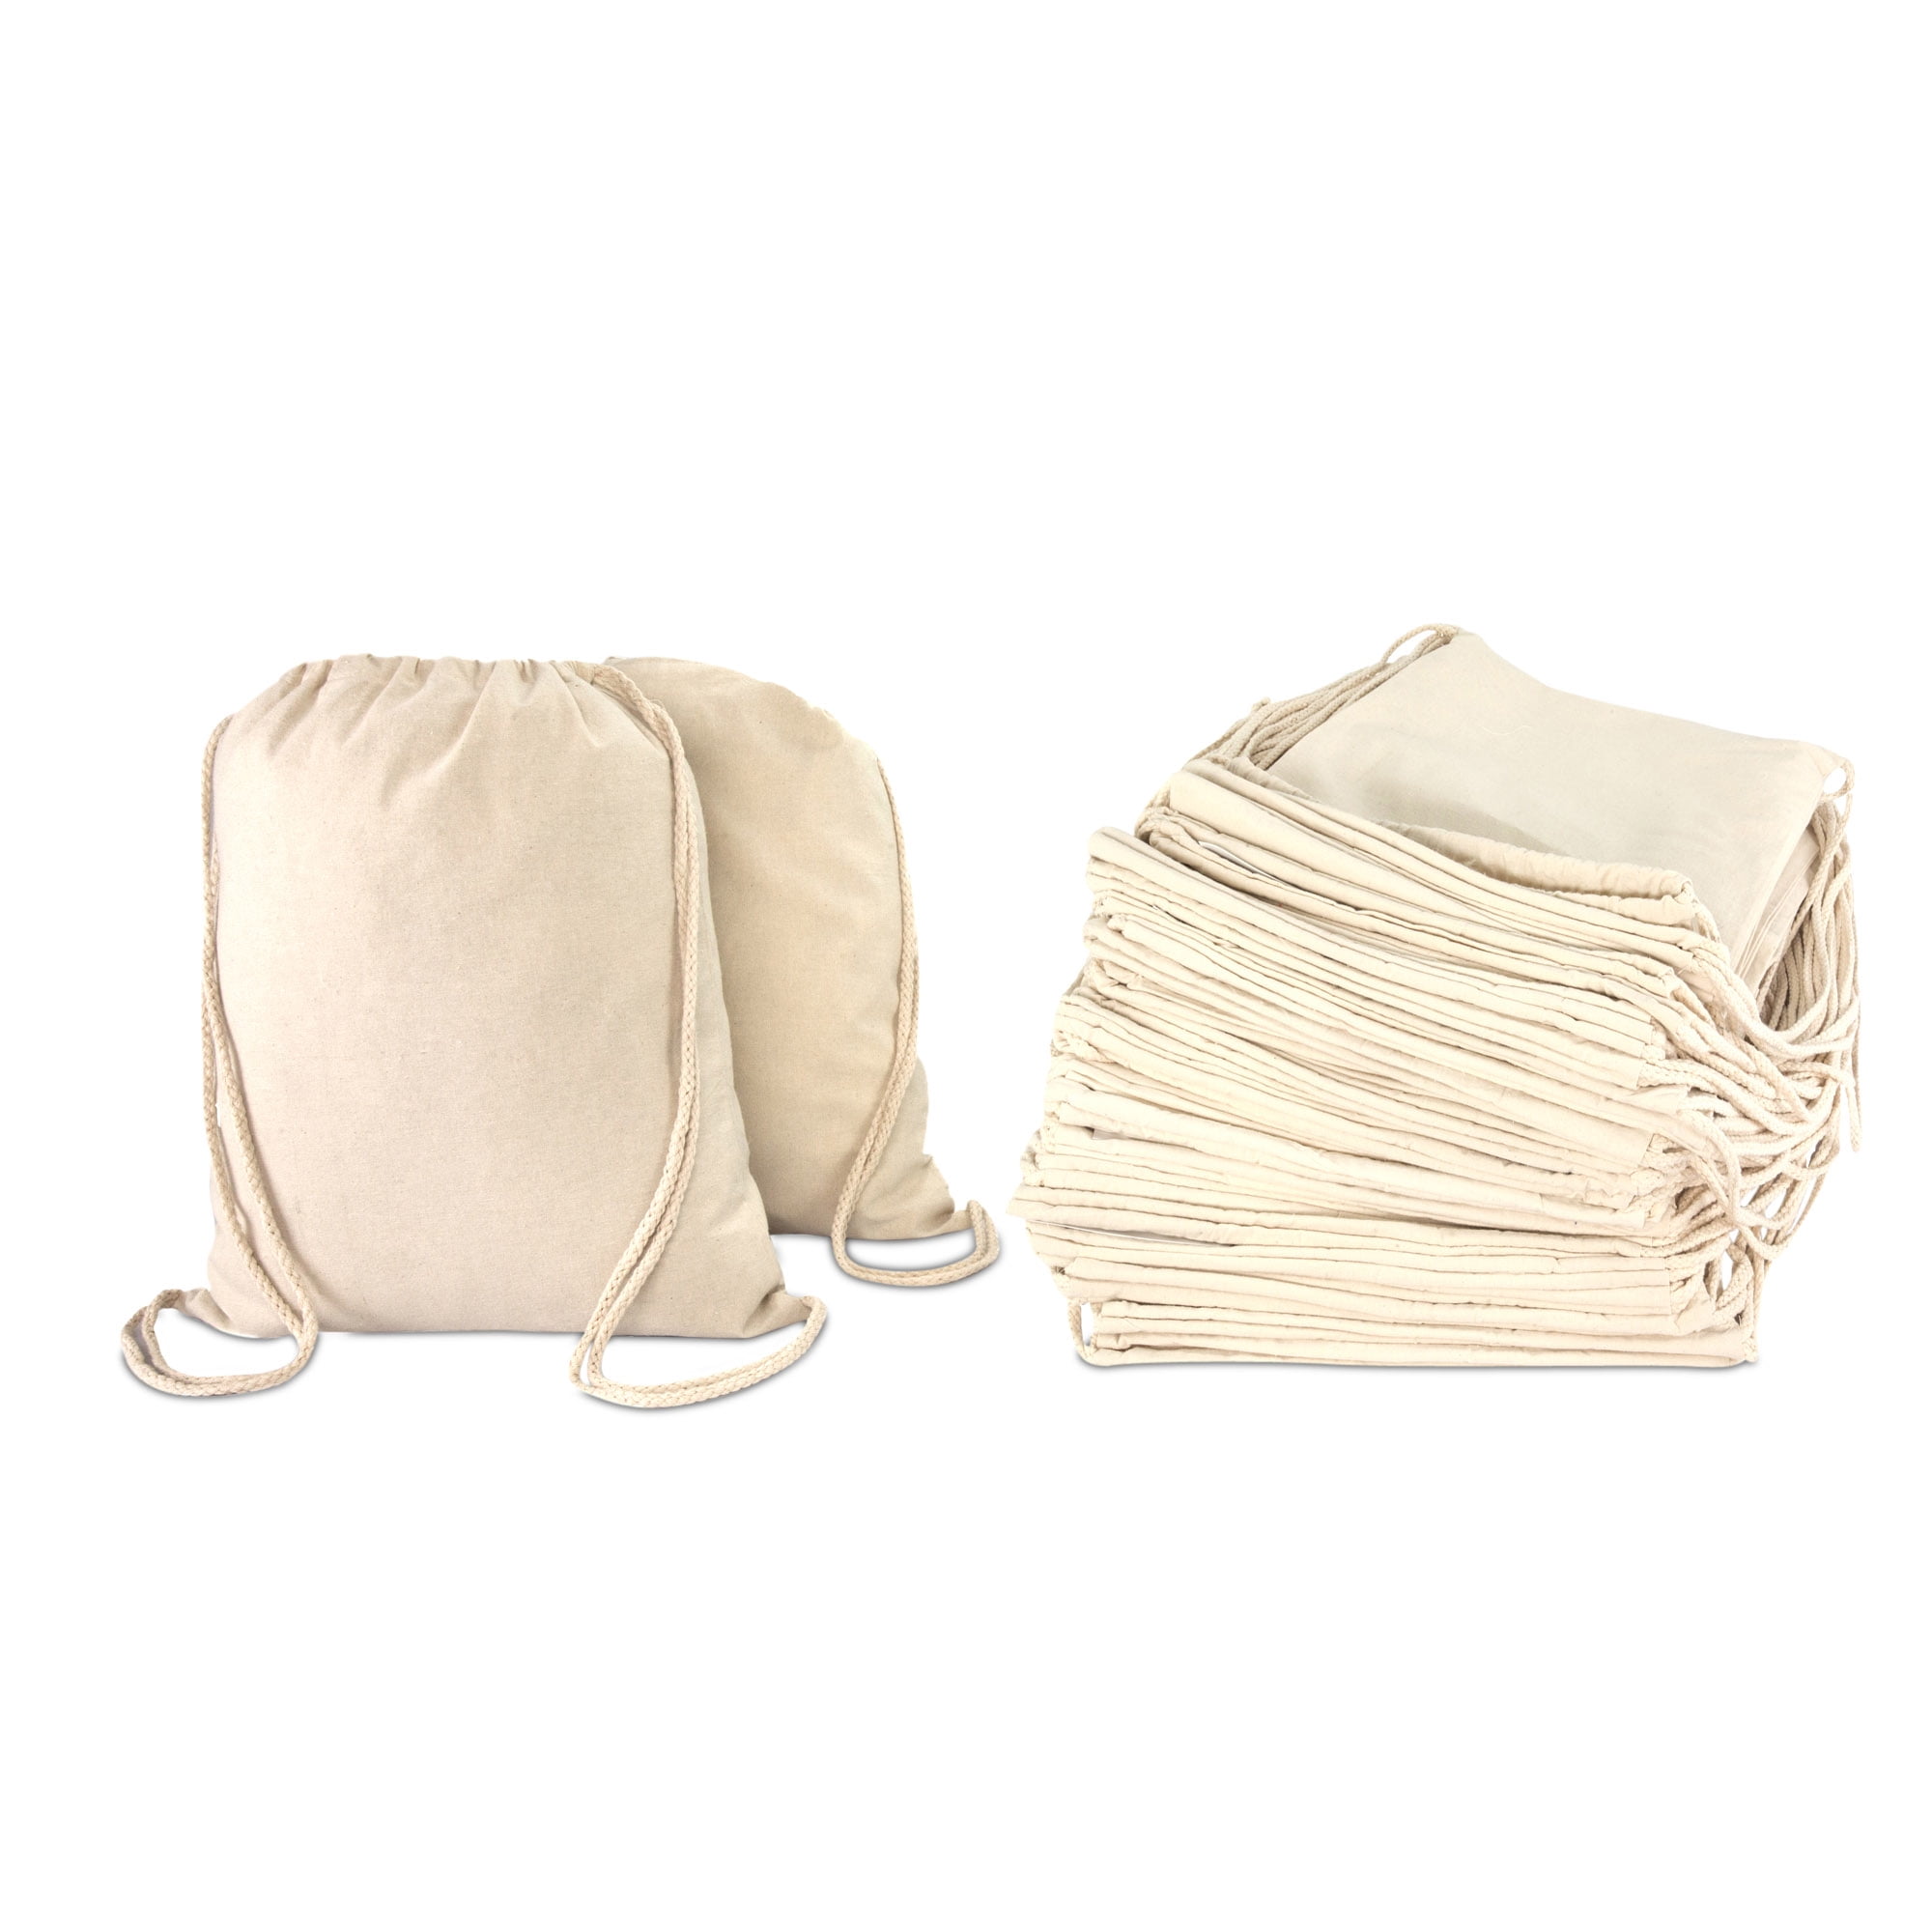 Mesh Laundry Bags  Netted Laundry Bag  Cheap Laundry Bags